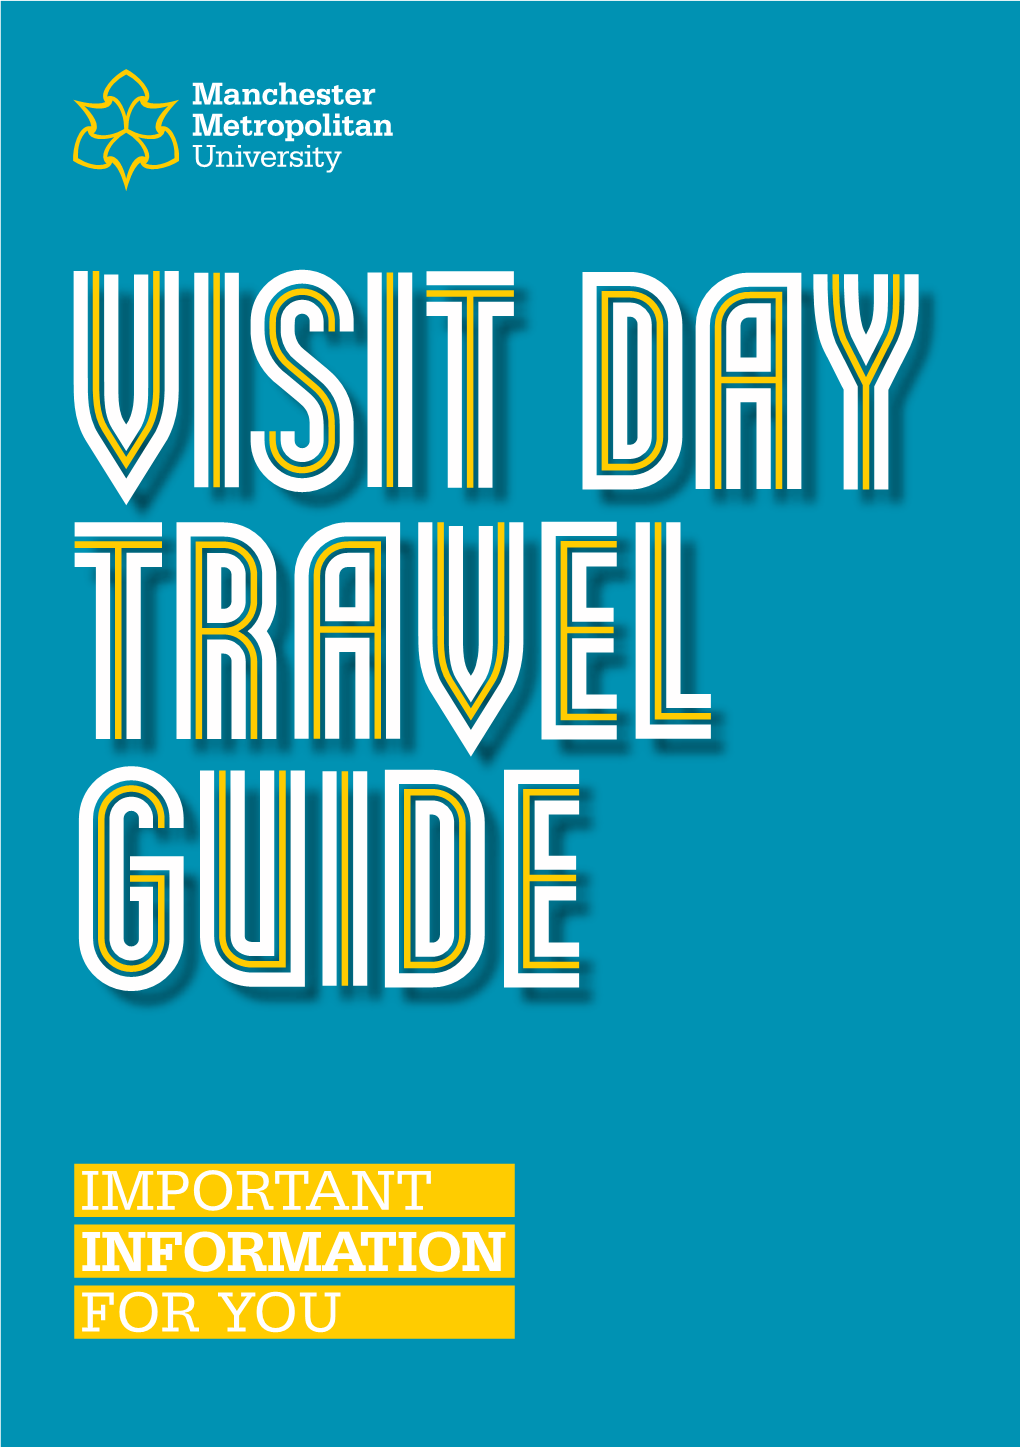 IMPORTANT INFORMATION for YOU Travelling by Public VISIT DAY TRANSPORT